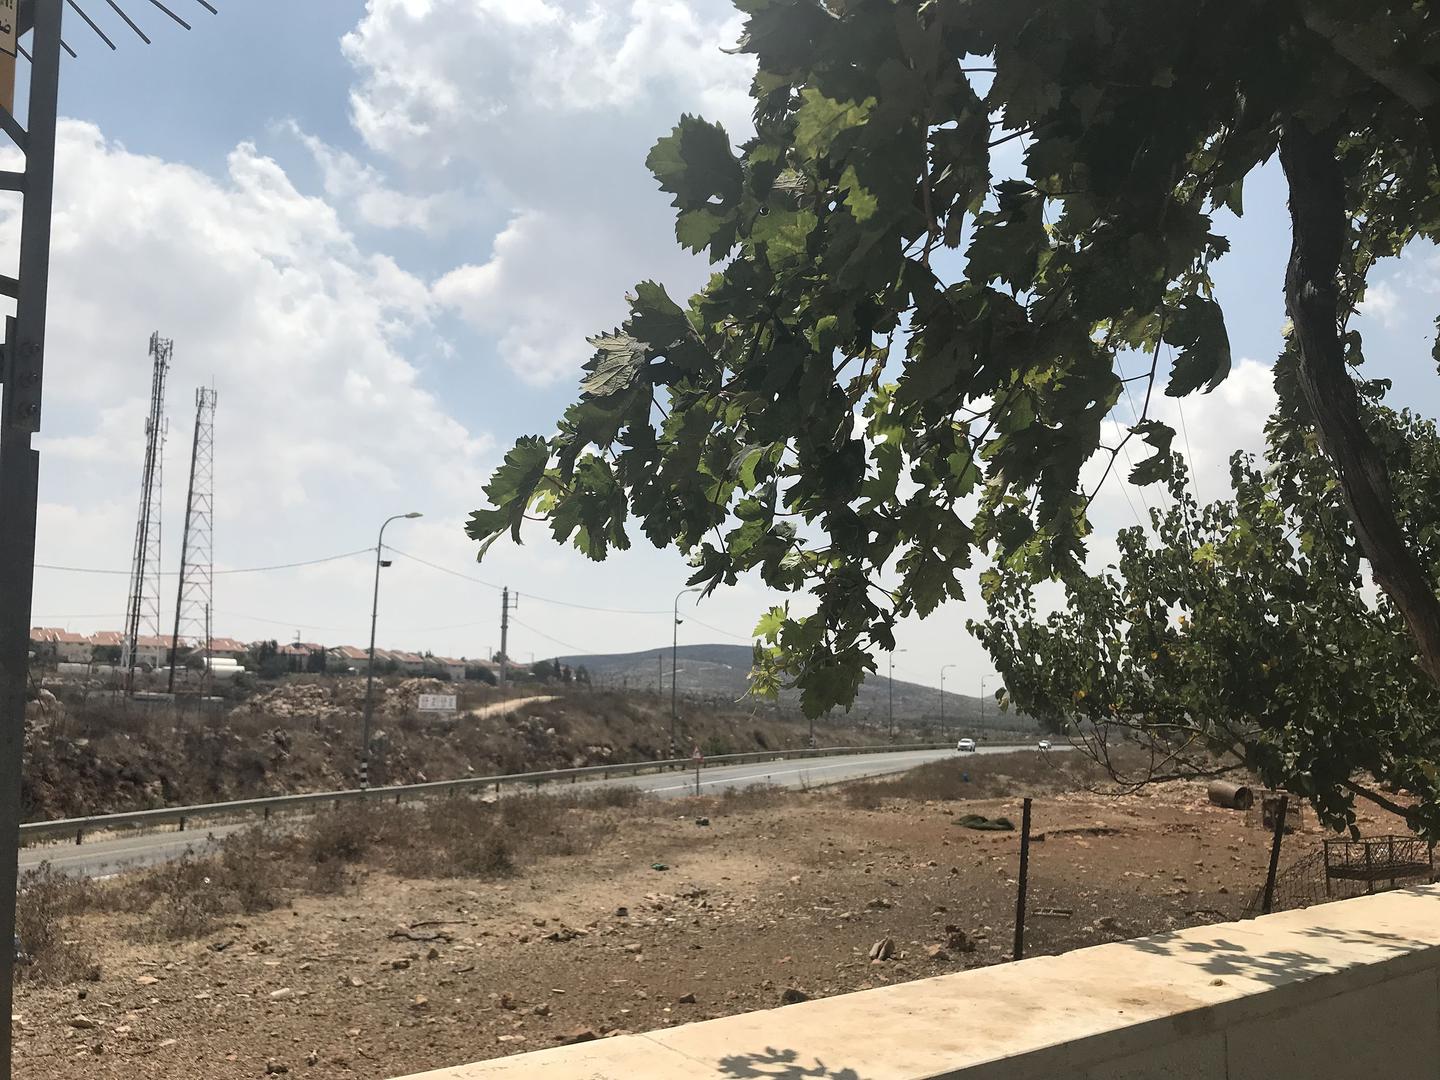 View of the Israeli settlement of Ofra and Road 60, an Israeli highway that runs largely through the center of the occupied of the West Bank, from Ein Yabroud, a Palestinian village northeast of Ramallah. Israeli authorities built parts of Road 60 and Ofr